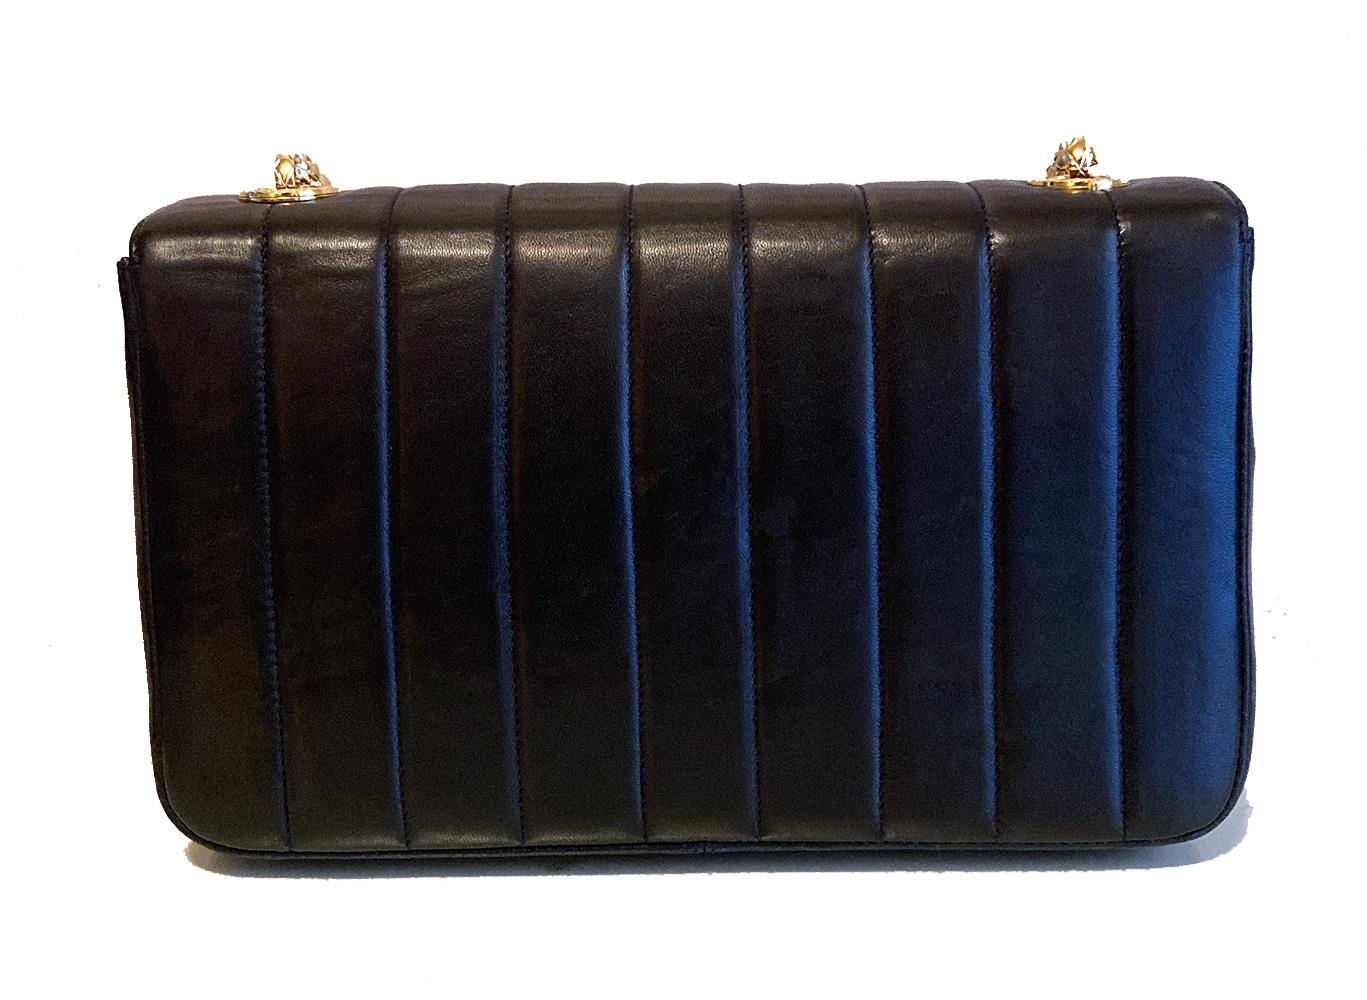 Vintage Chanel Navy Blue Stripe Quilted Classic Flap in very good condition. Navy blue lambskin exterior in rare and unique stripe quilted pattern trimmed with embossed gold hardware. Signature CC logo twist closure opens via single flap to a